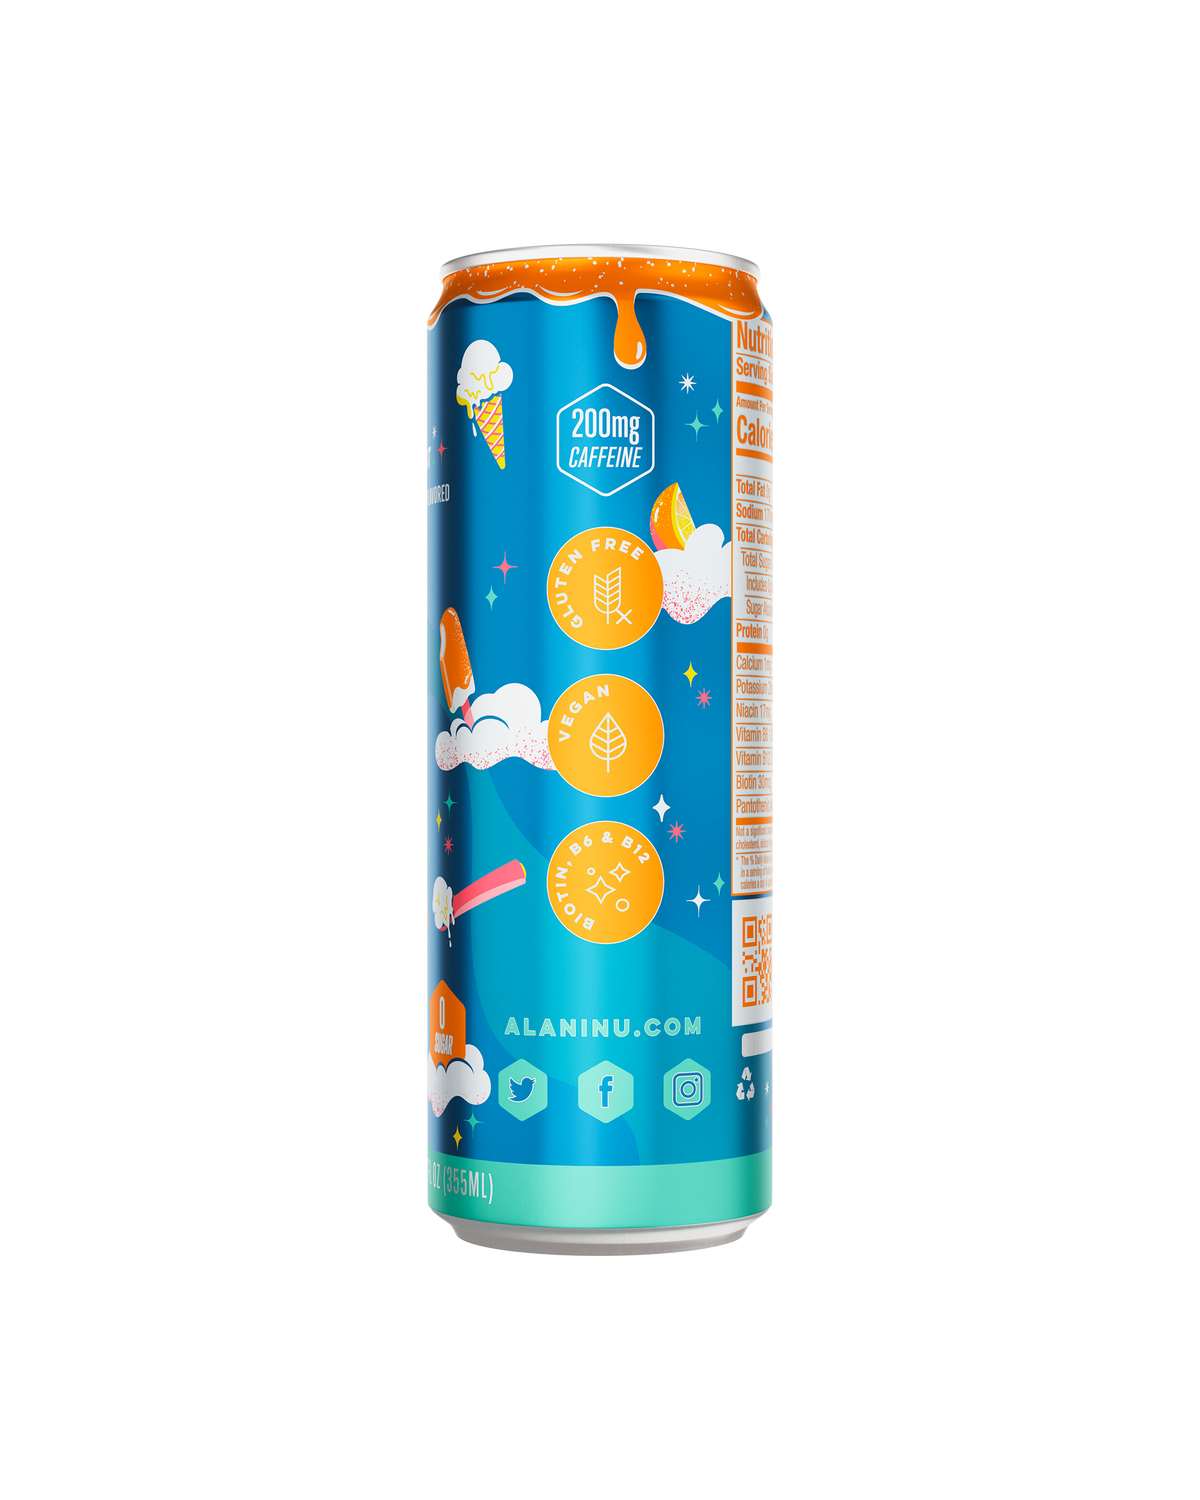 A side view of energy drink in Dream Float flavor showcasing product details such as vegan friendly, caffeine details and gluten free details.